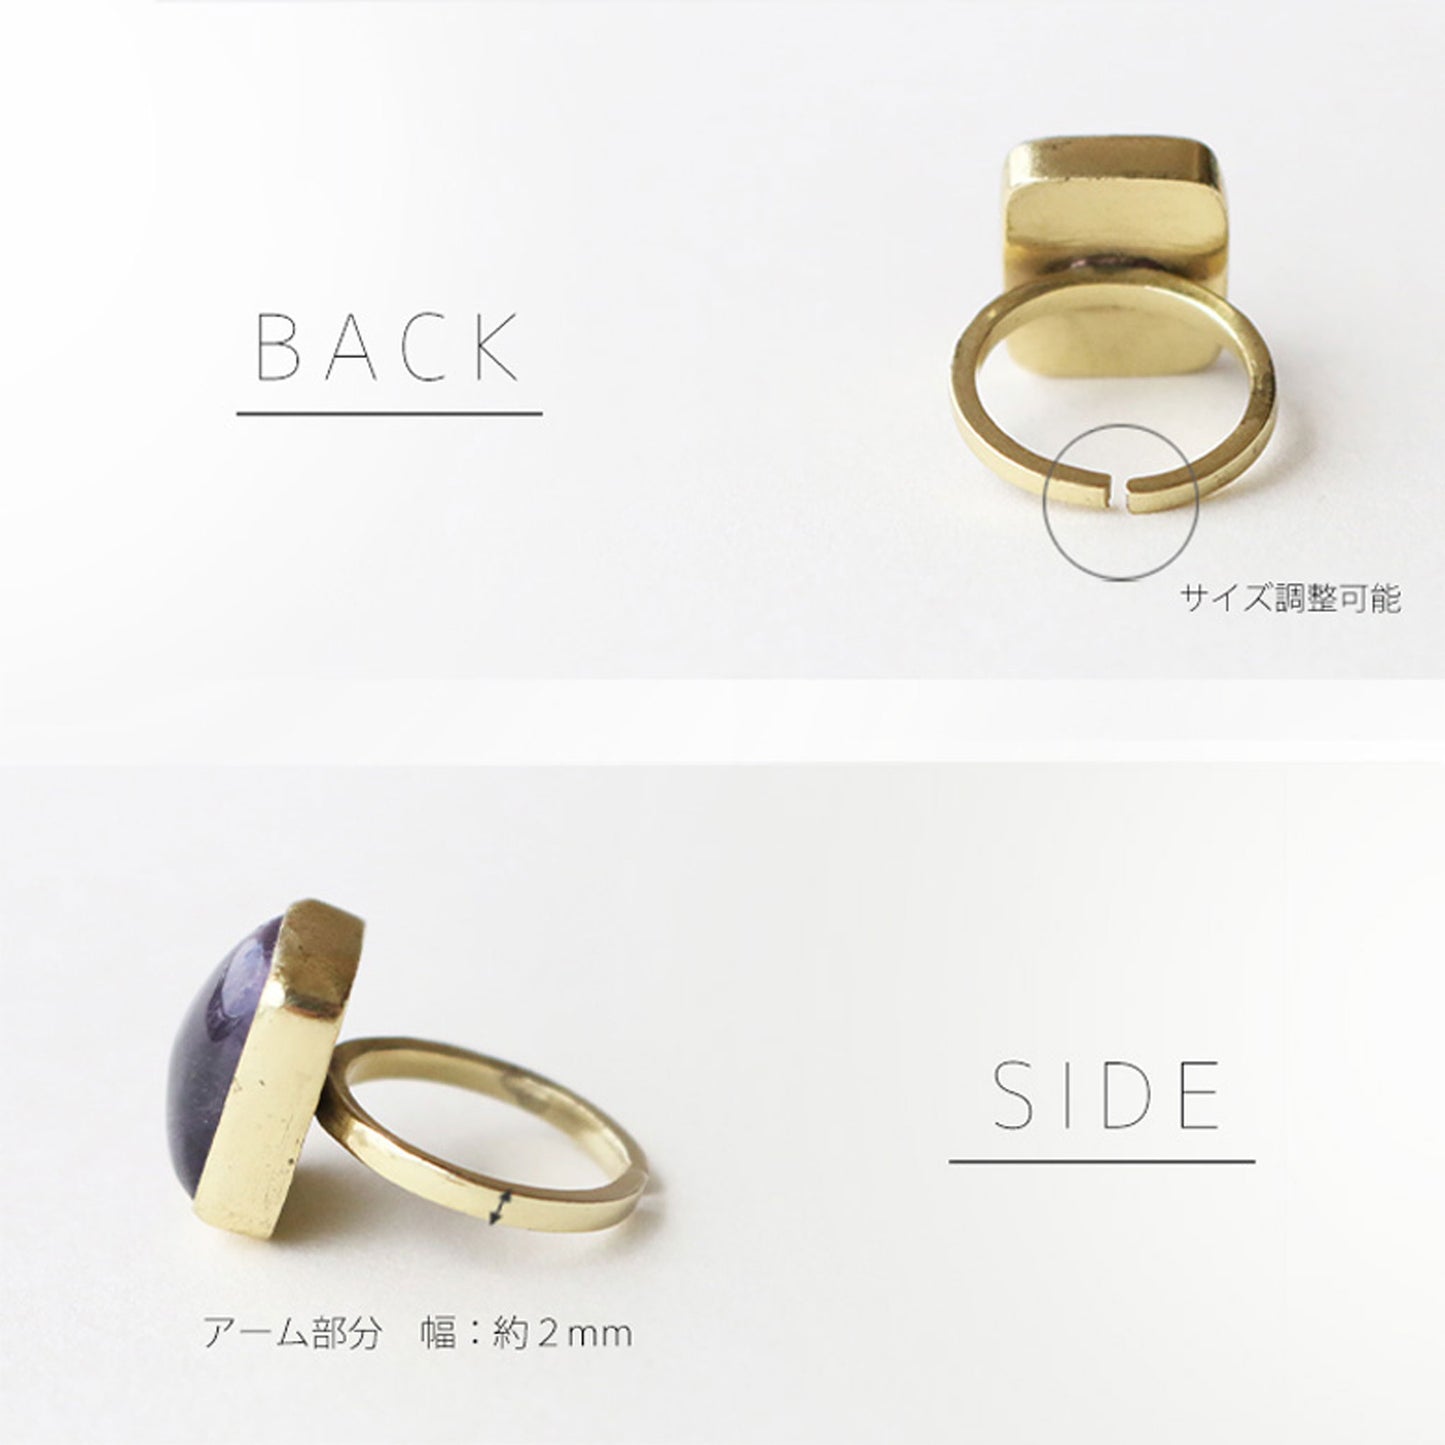 Natural stone ring / TR20002